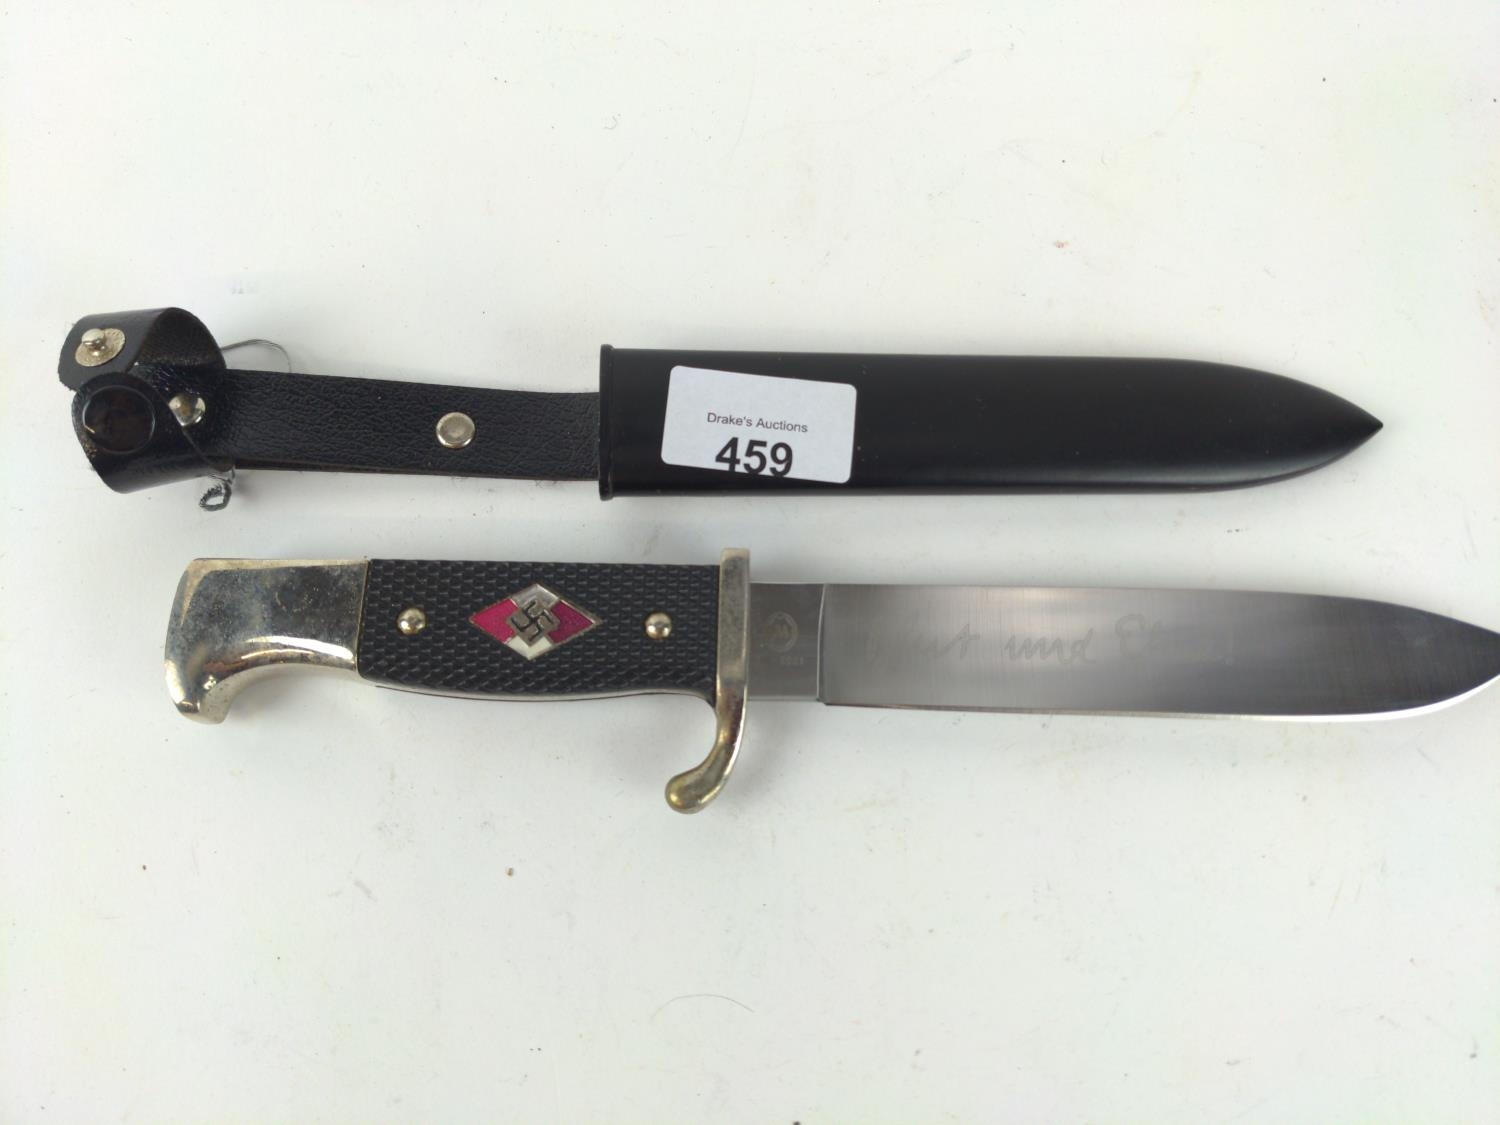 Reproduction Hitler Youth knife. 